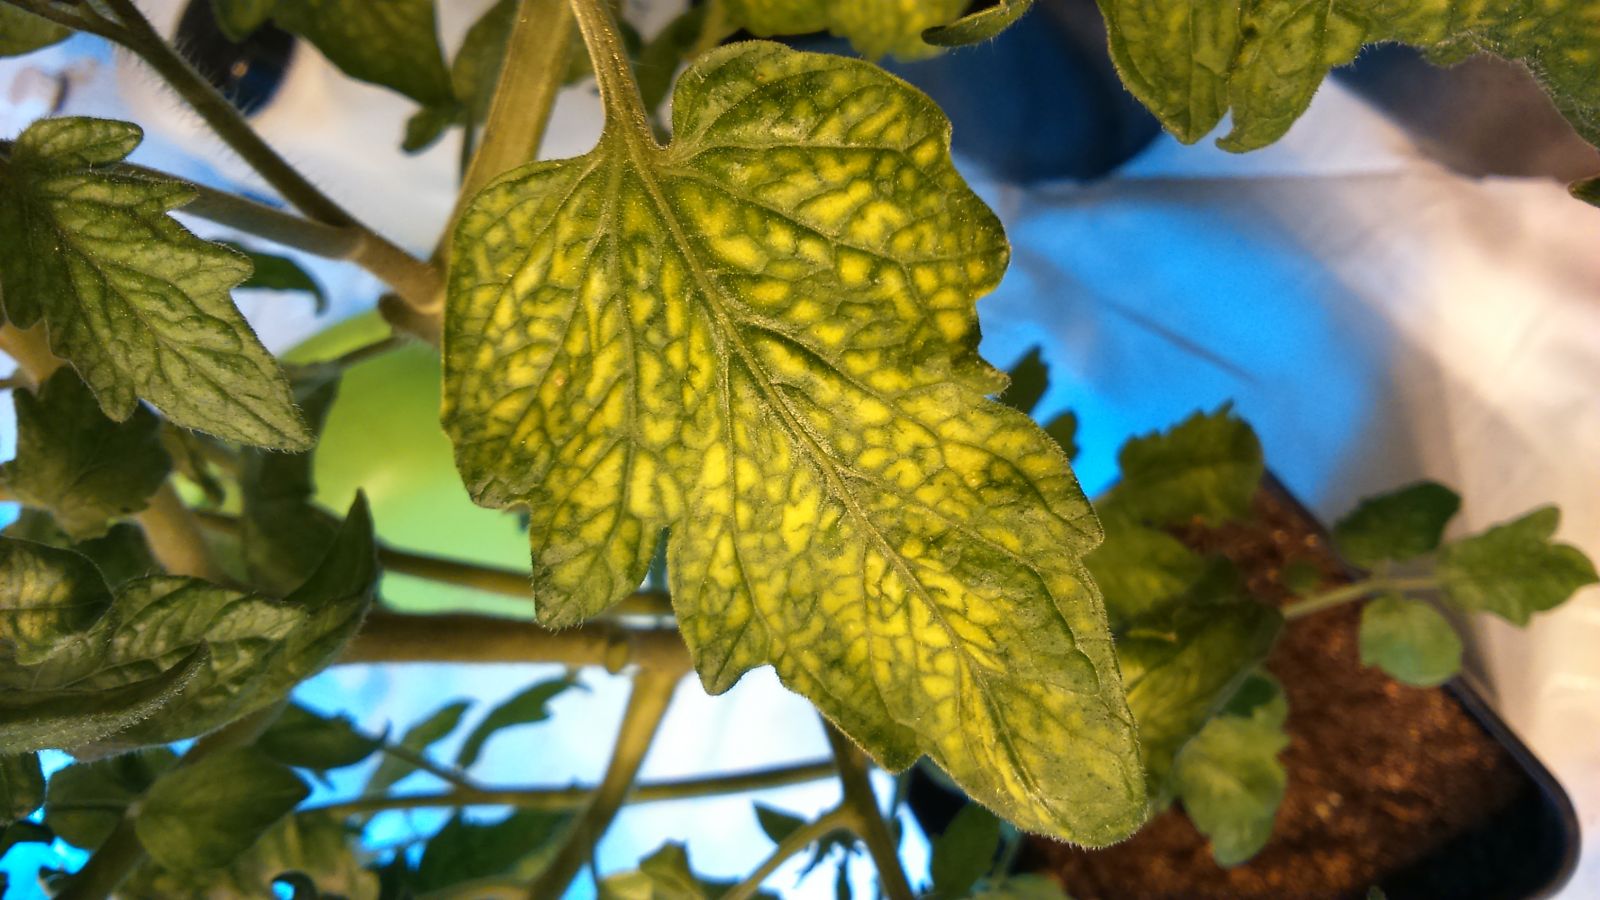 Tomato leaf showing yellowing between the veins